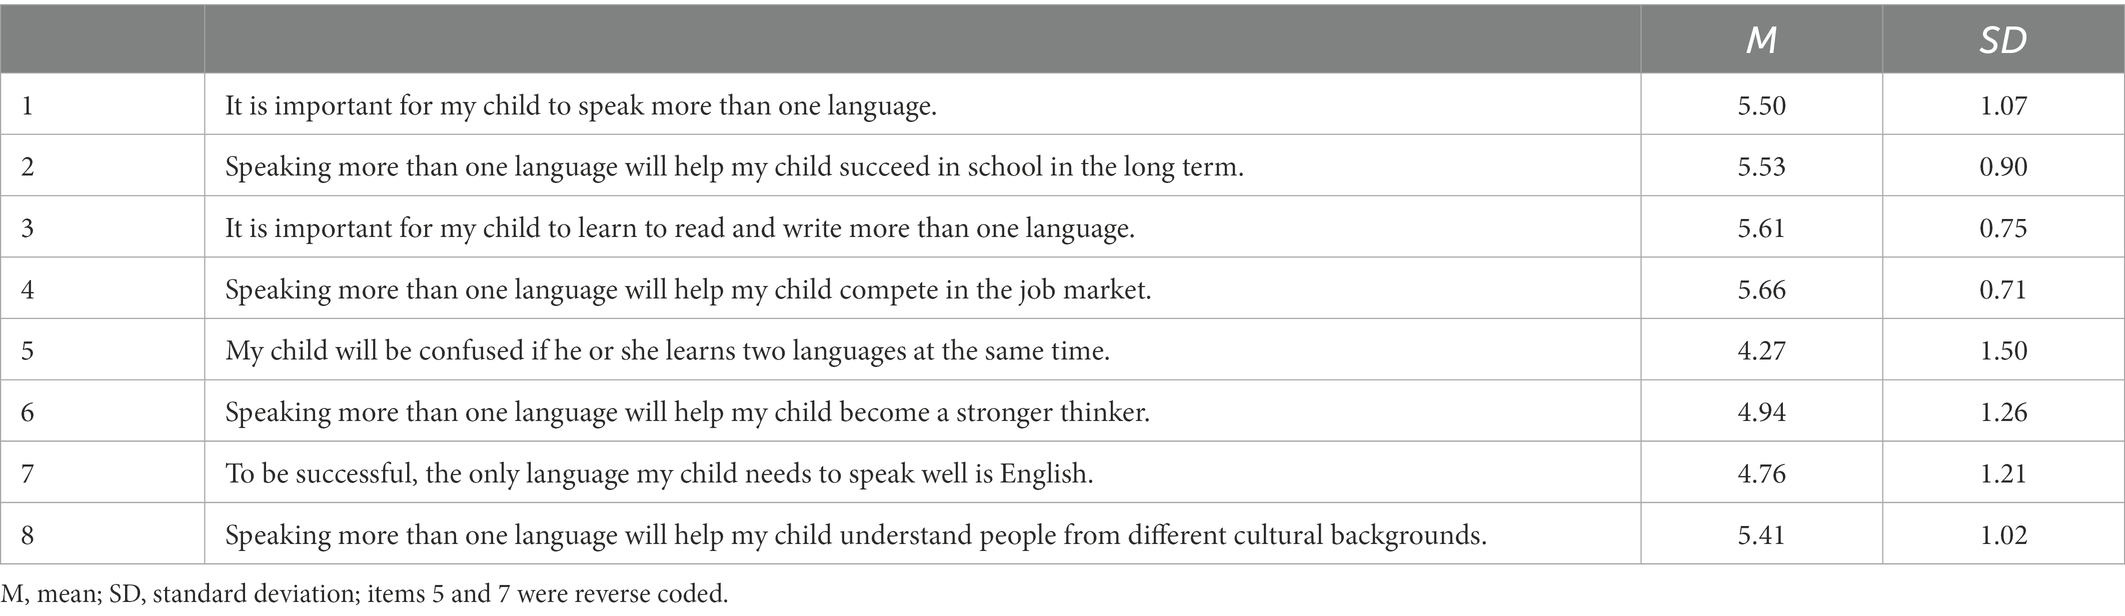 Bilingual and Home Language Interventions With Young Dual Language